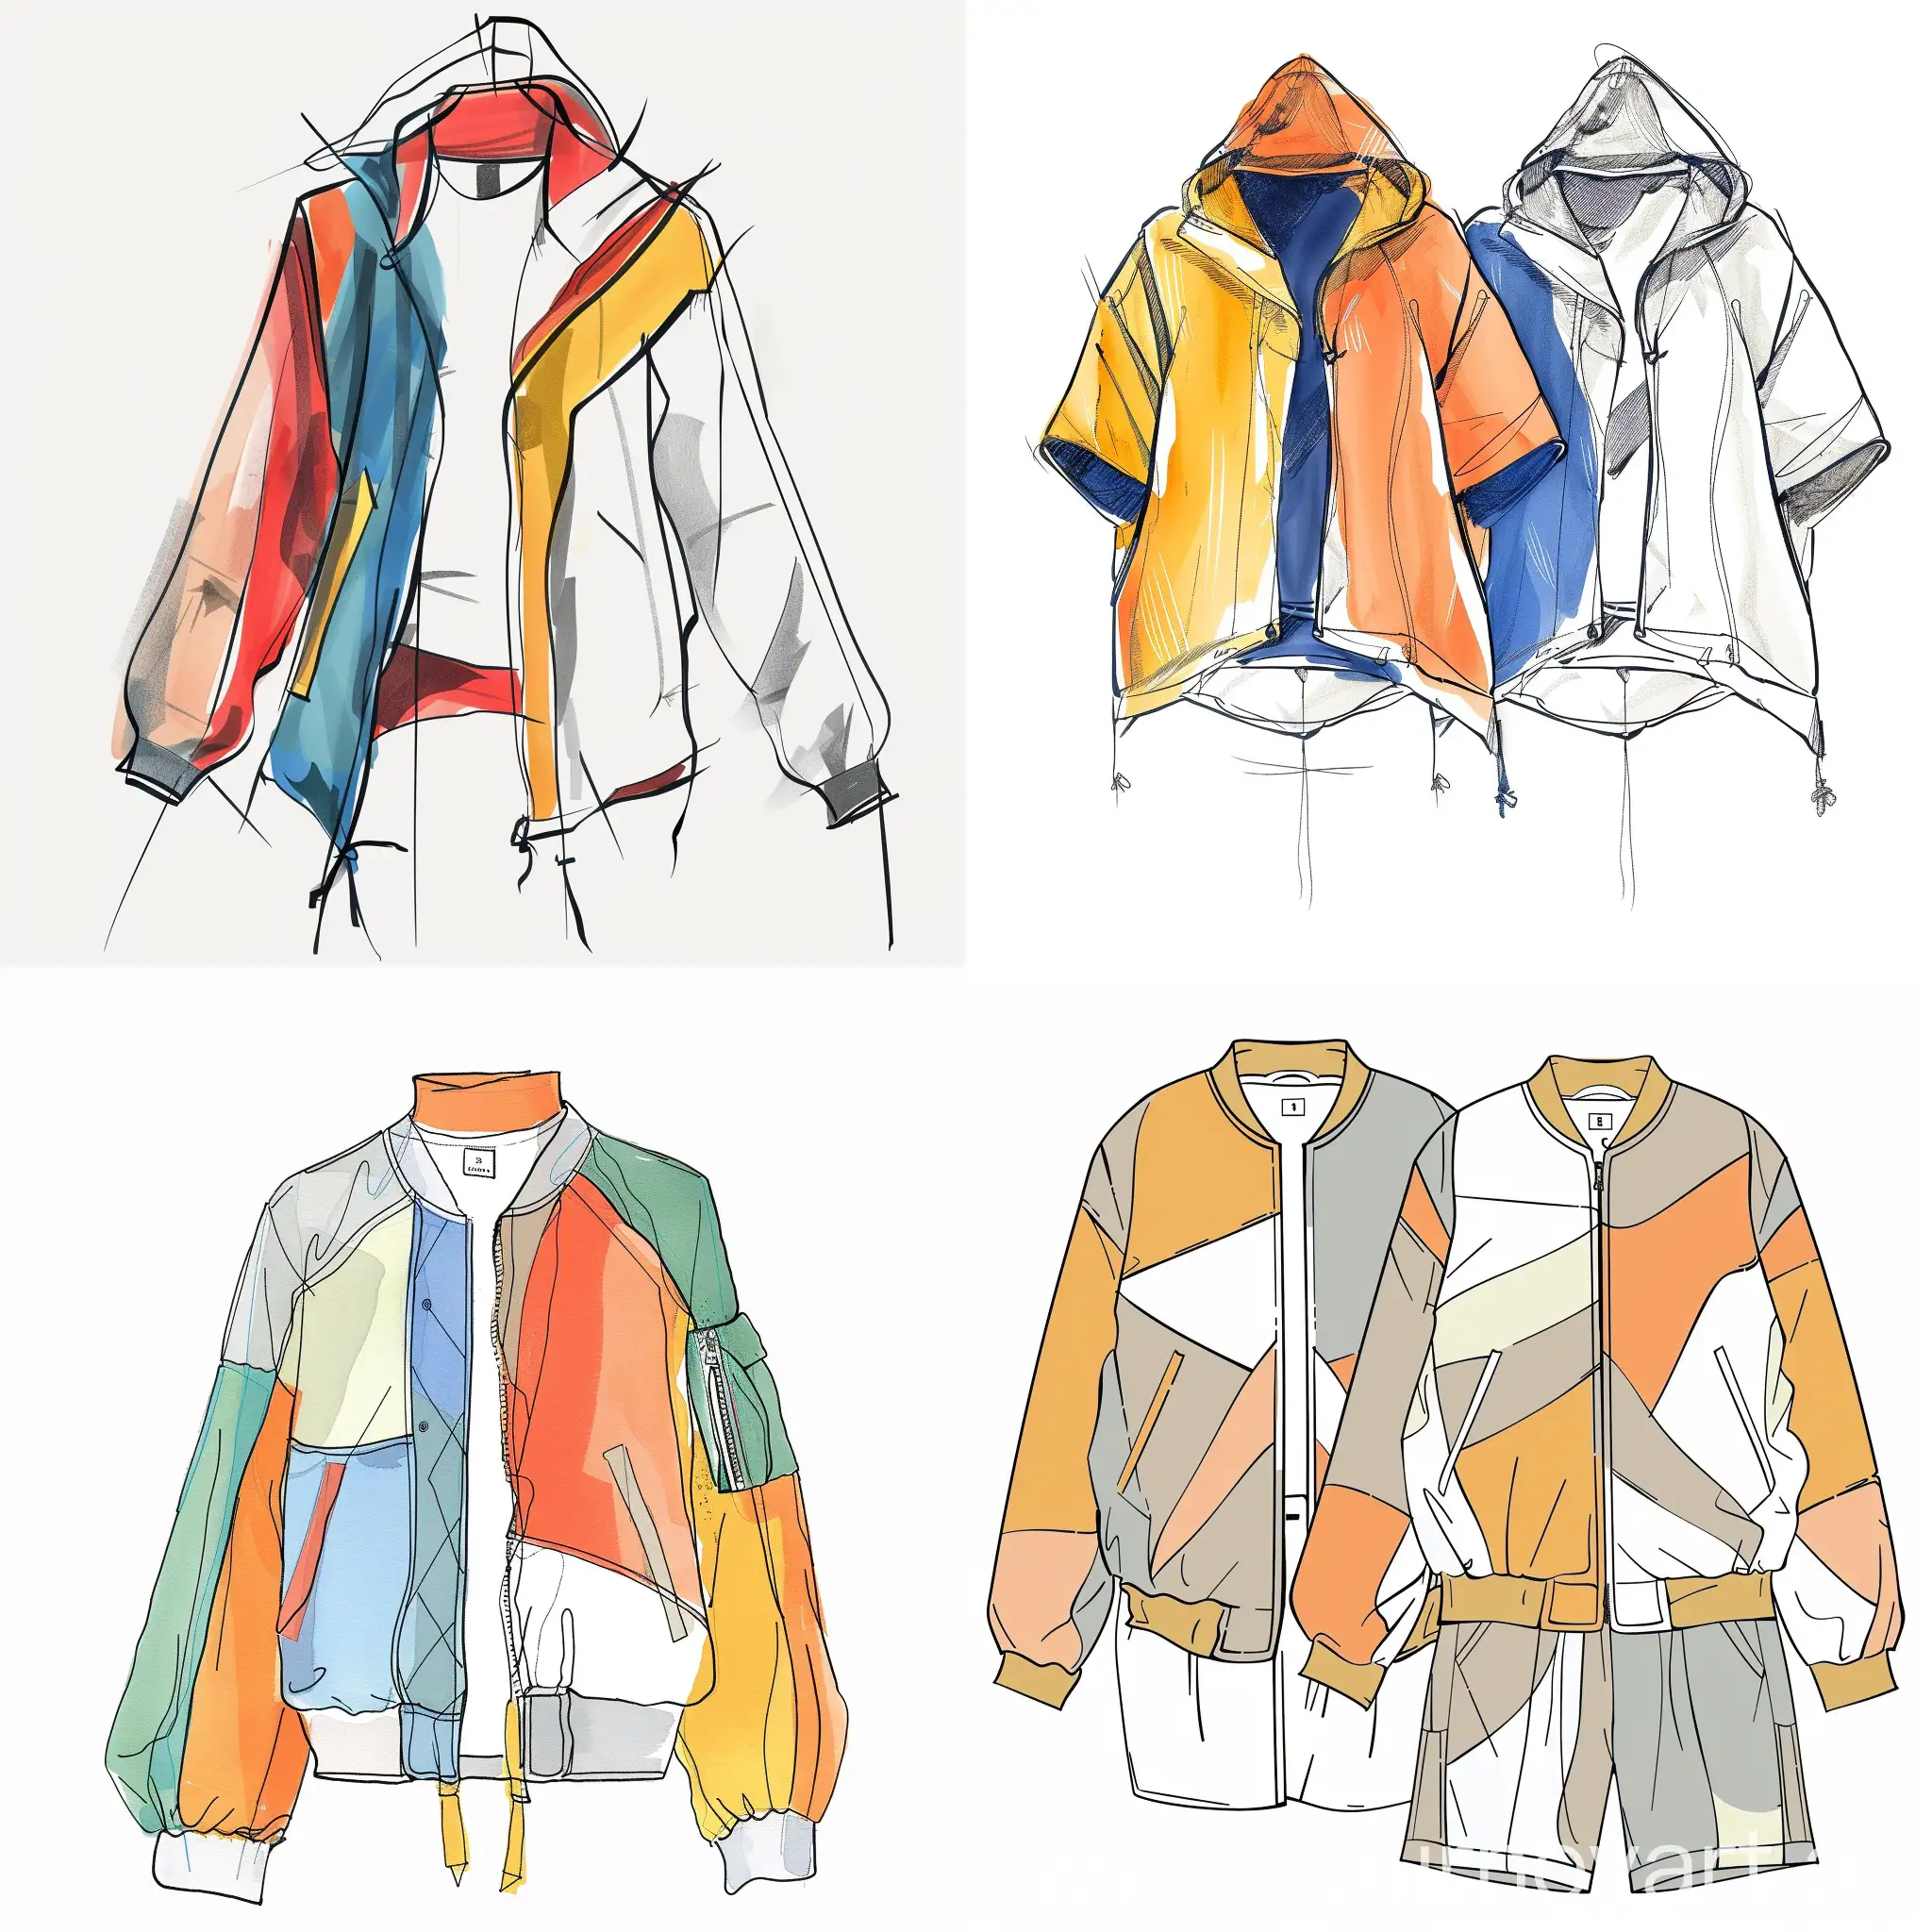 (Obverse:1.3), (Reverse:1.3),Fashion clothing,Outdoor Jackets,summer popular colors ,Avant-garde ,asymmetric structure,Line drawing, minimalistic, hand-drawn,,,,,,Line draft, minimalist, hand drawn style, clothing design, modern